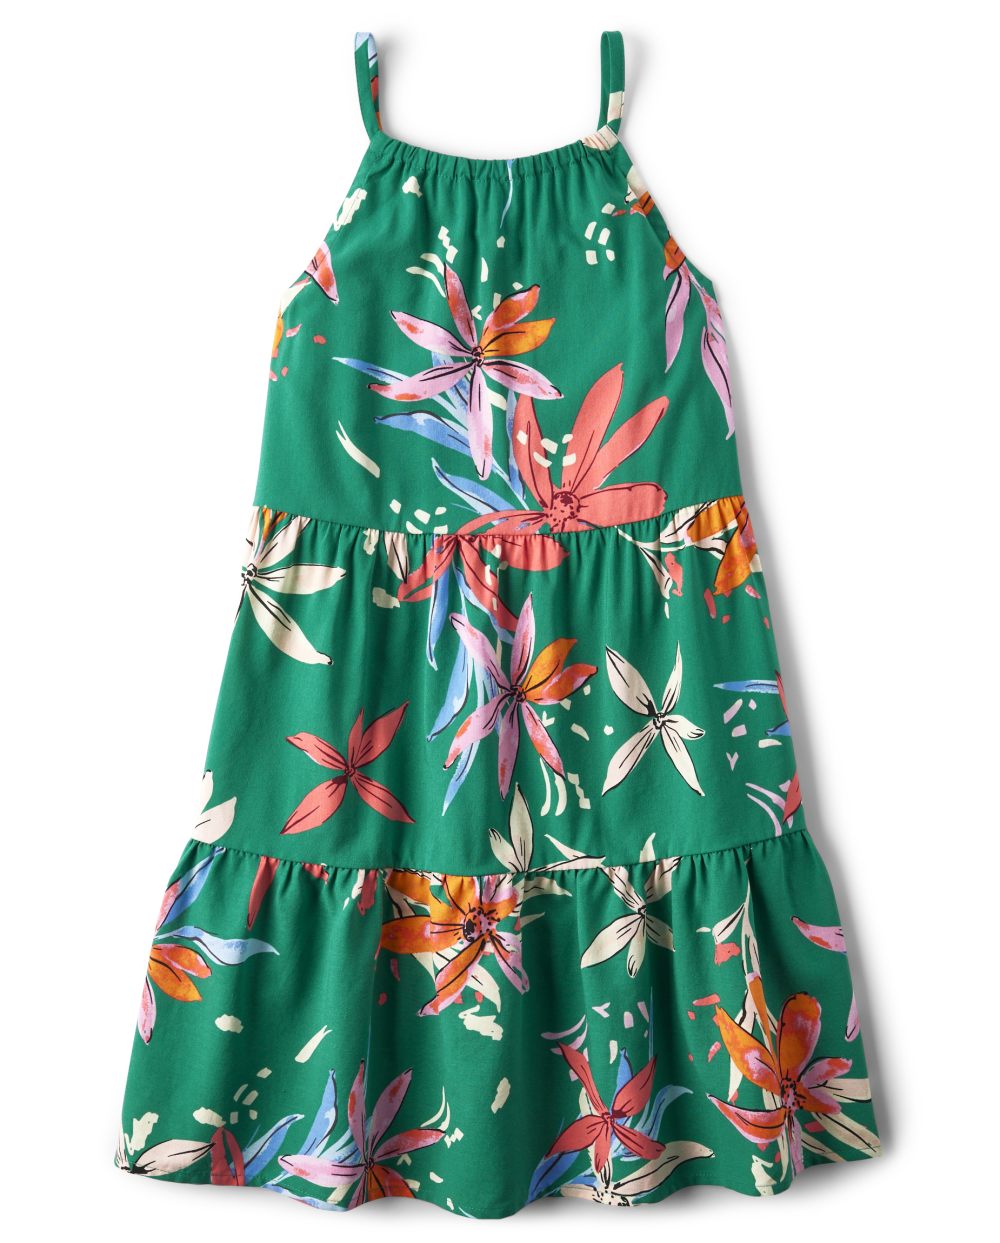 Girls Tiered Above the Knee Floral Tropical Print Halter Sleeveless Dress